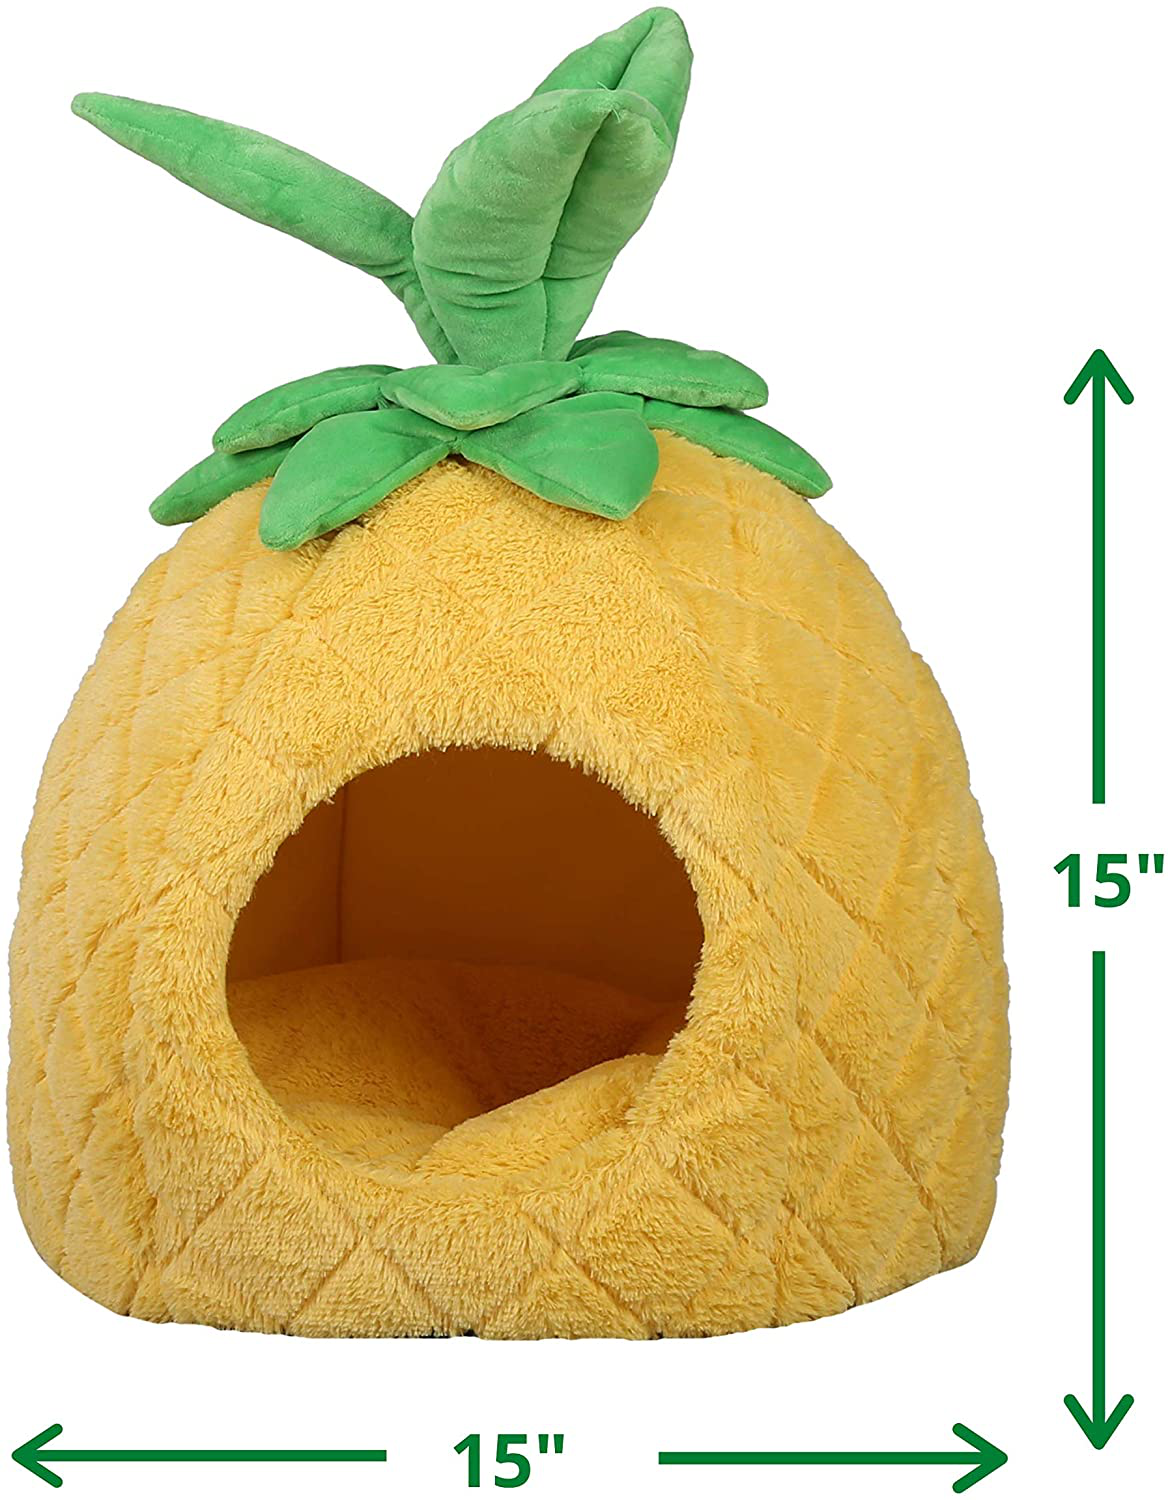 Petnpurr Pineapple Pet Bed for Cats, Puppy and Small Dogs in Super Plush Self-Warming Material – Soft Cushion, Fun Design, Private Cat Cave and Dog House Animals & Pet Supplies > Pet Supplies > Cat Supplies > Cat Beds PetnPurr   